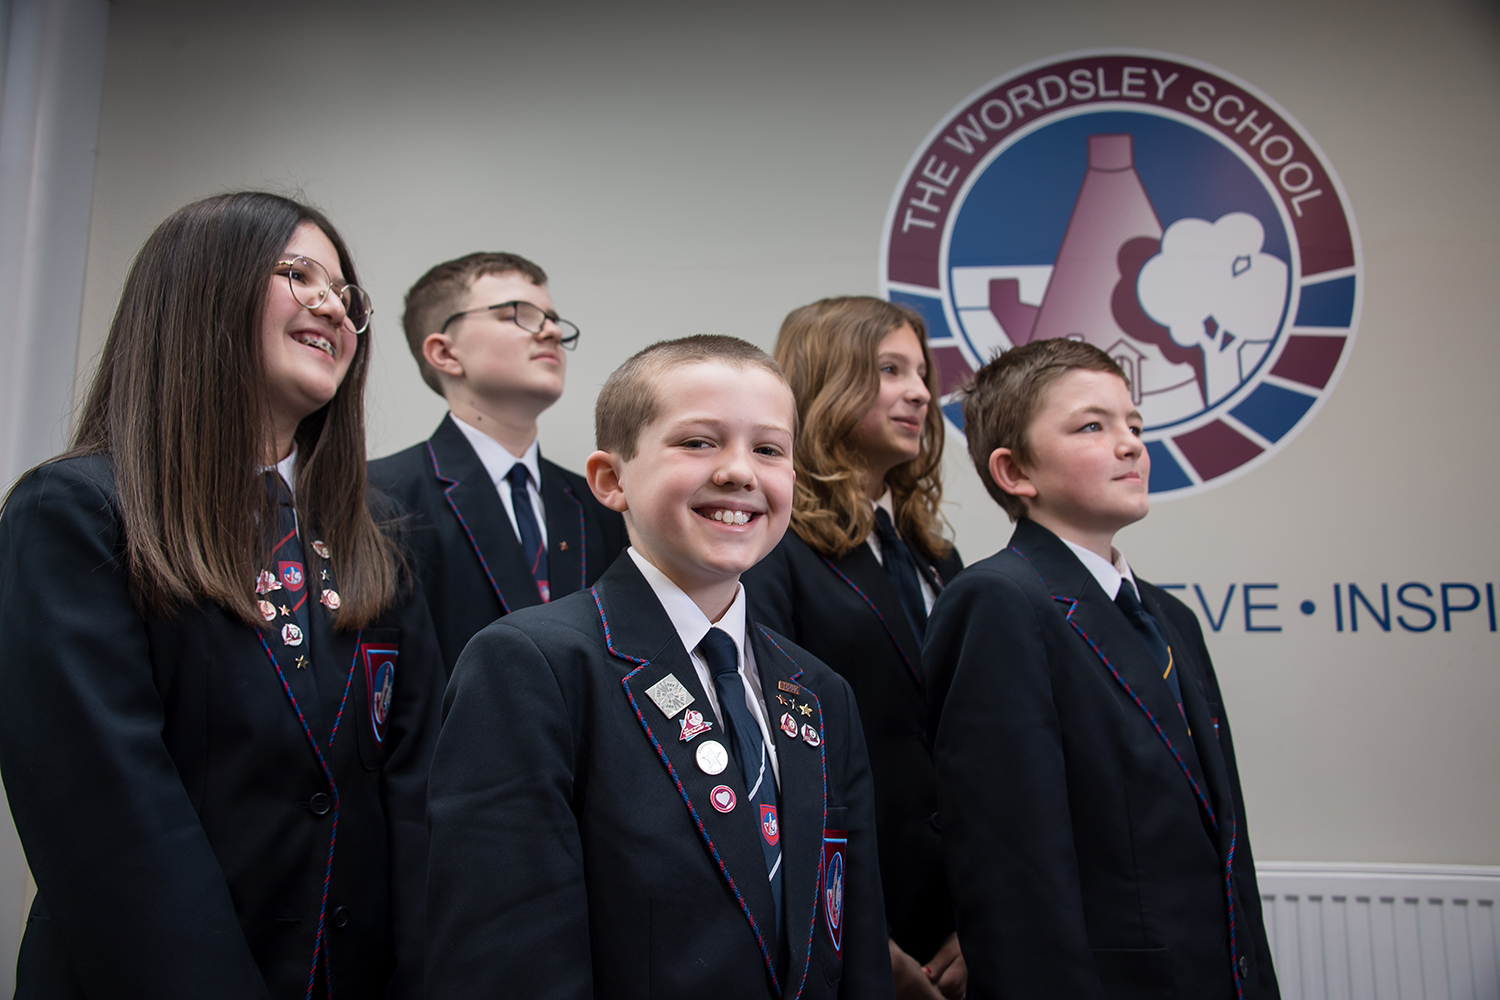 Five students in uniform standing in front of Wordsley logo on the wall. One boy at the front smiling at the camera